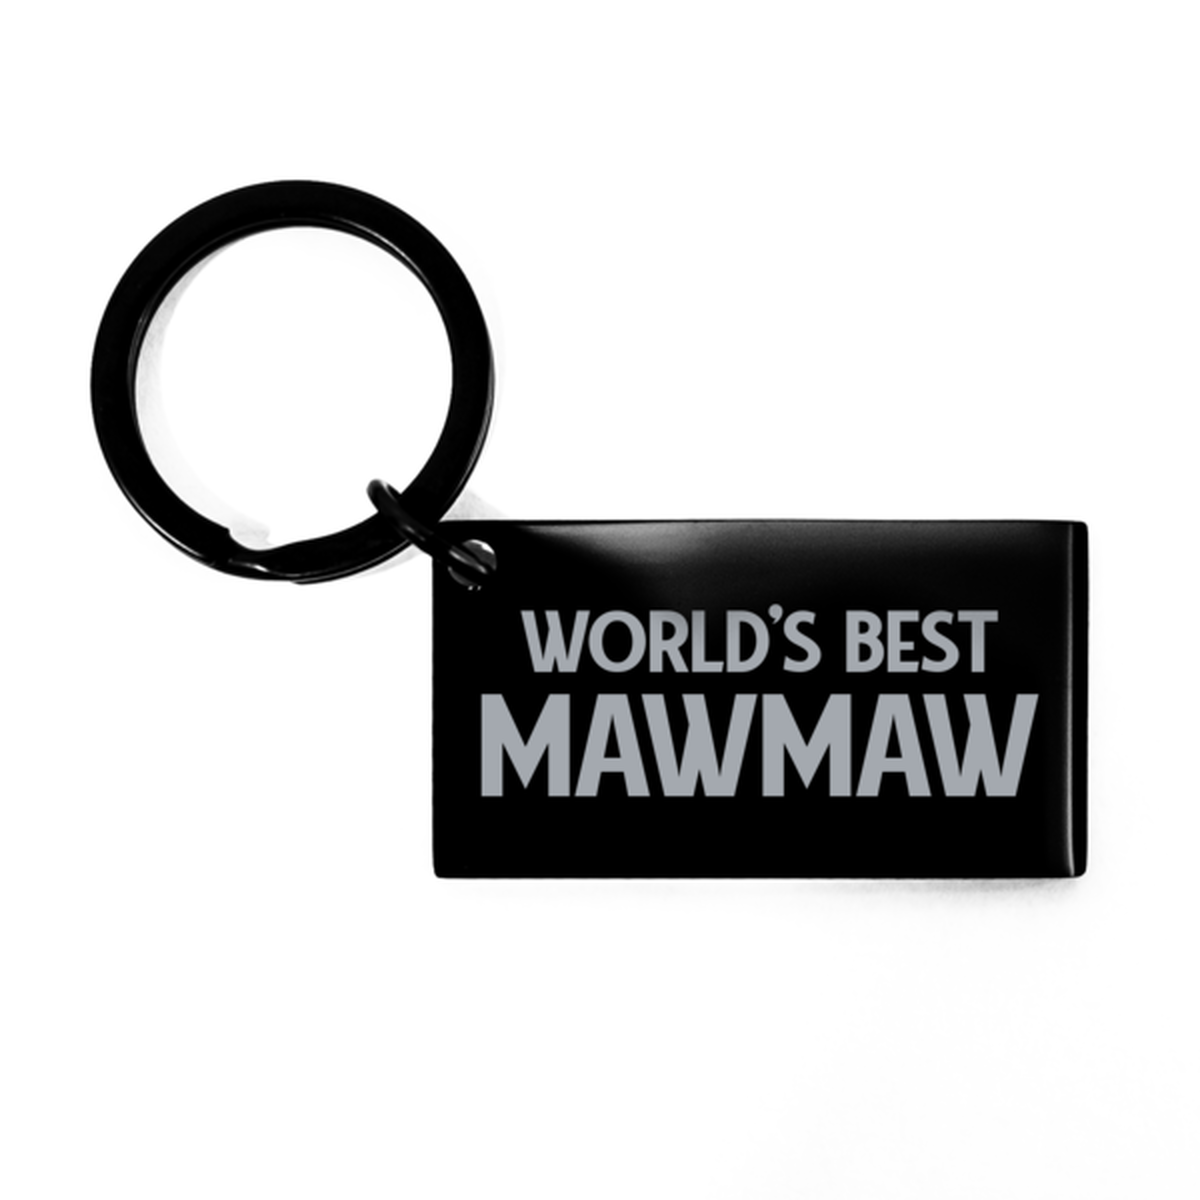 Worlds Best Mawmaw Gifts, Funny Black Engraved Keychain For Mawmaw, Birthday Presents For Women